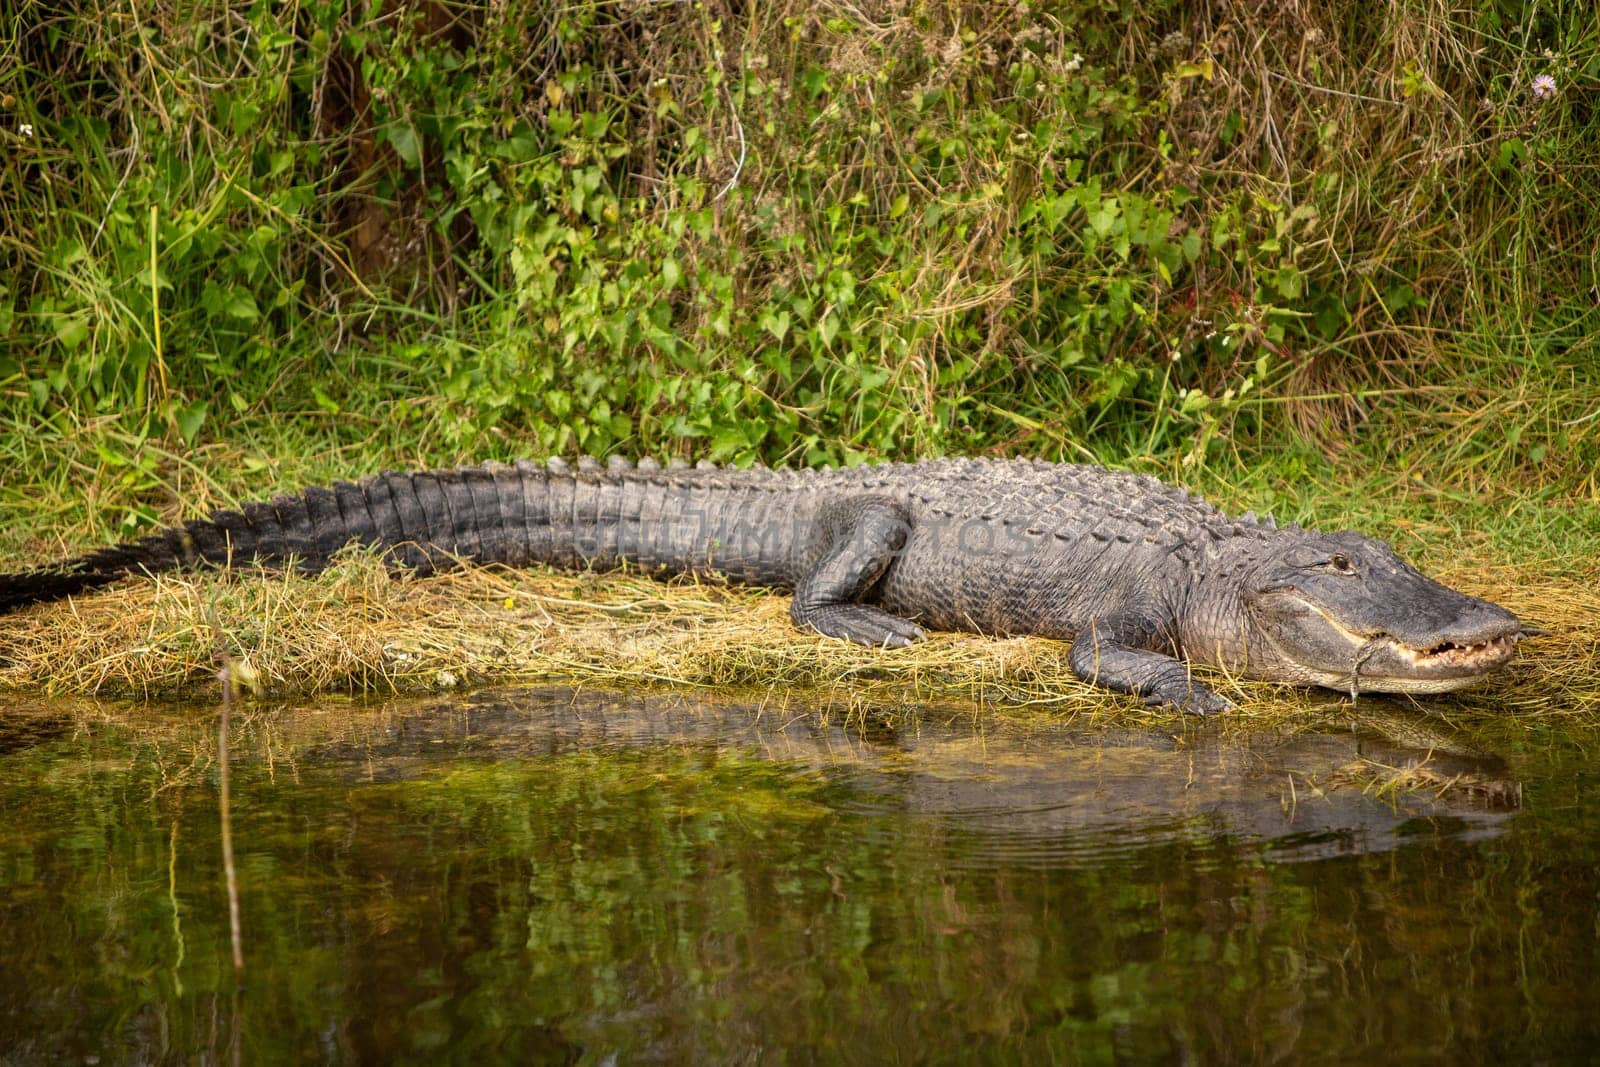 Happy gator on land relaxing after a meal